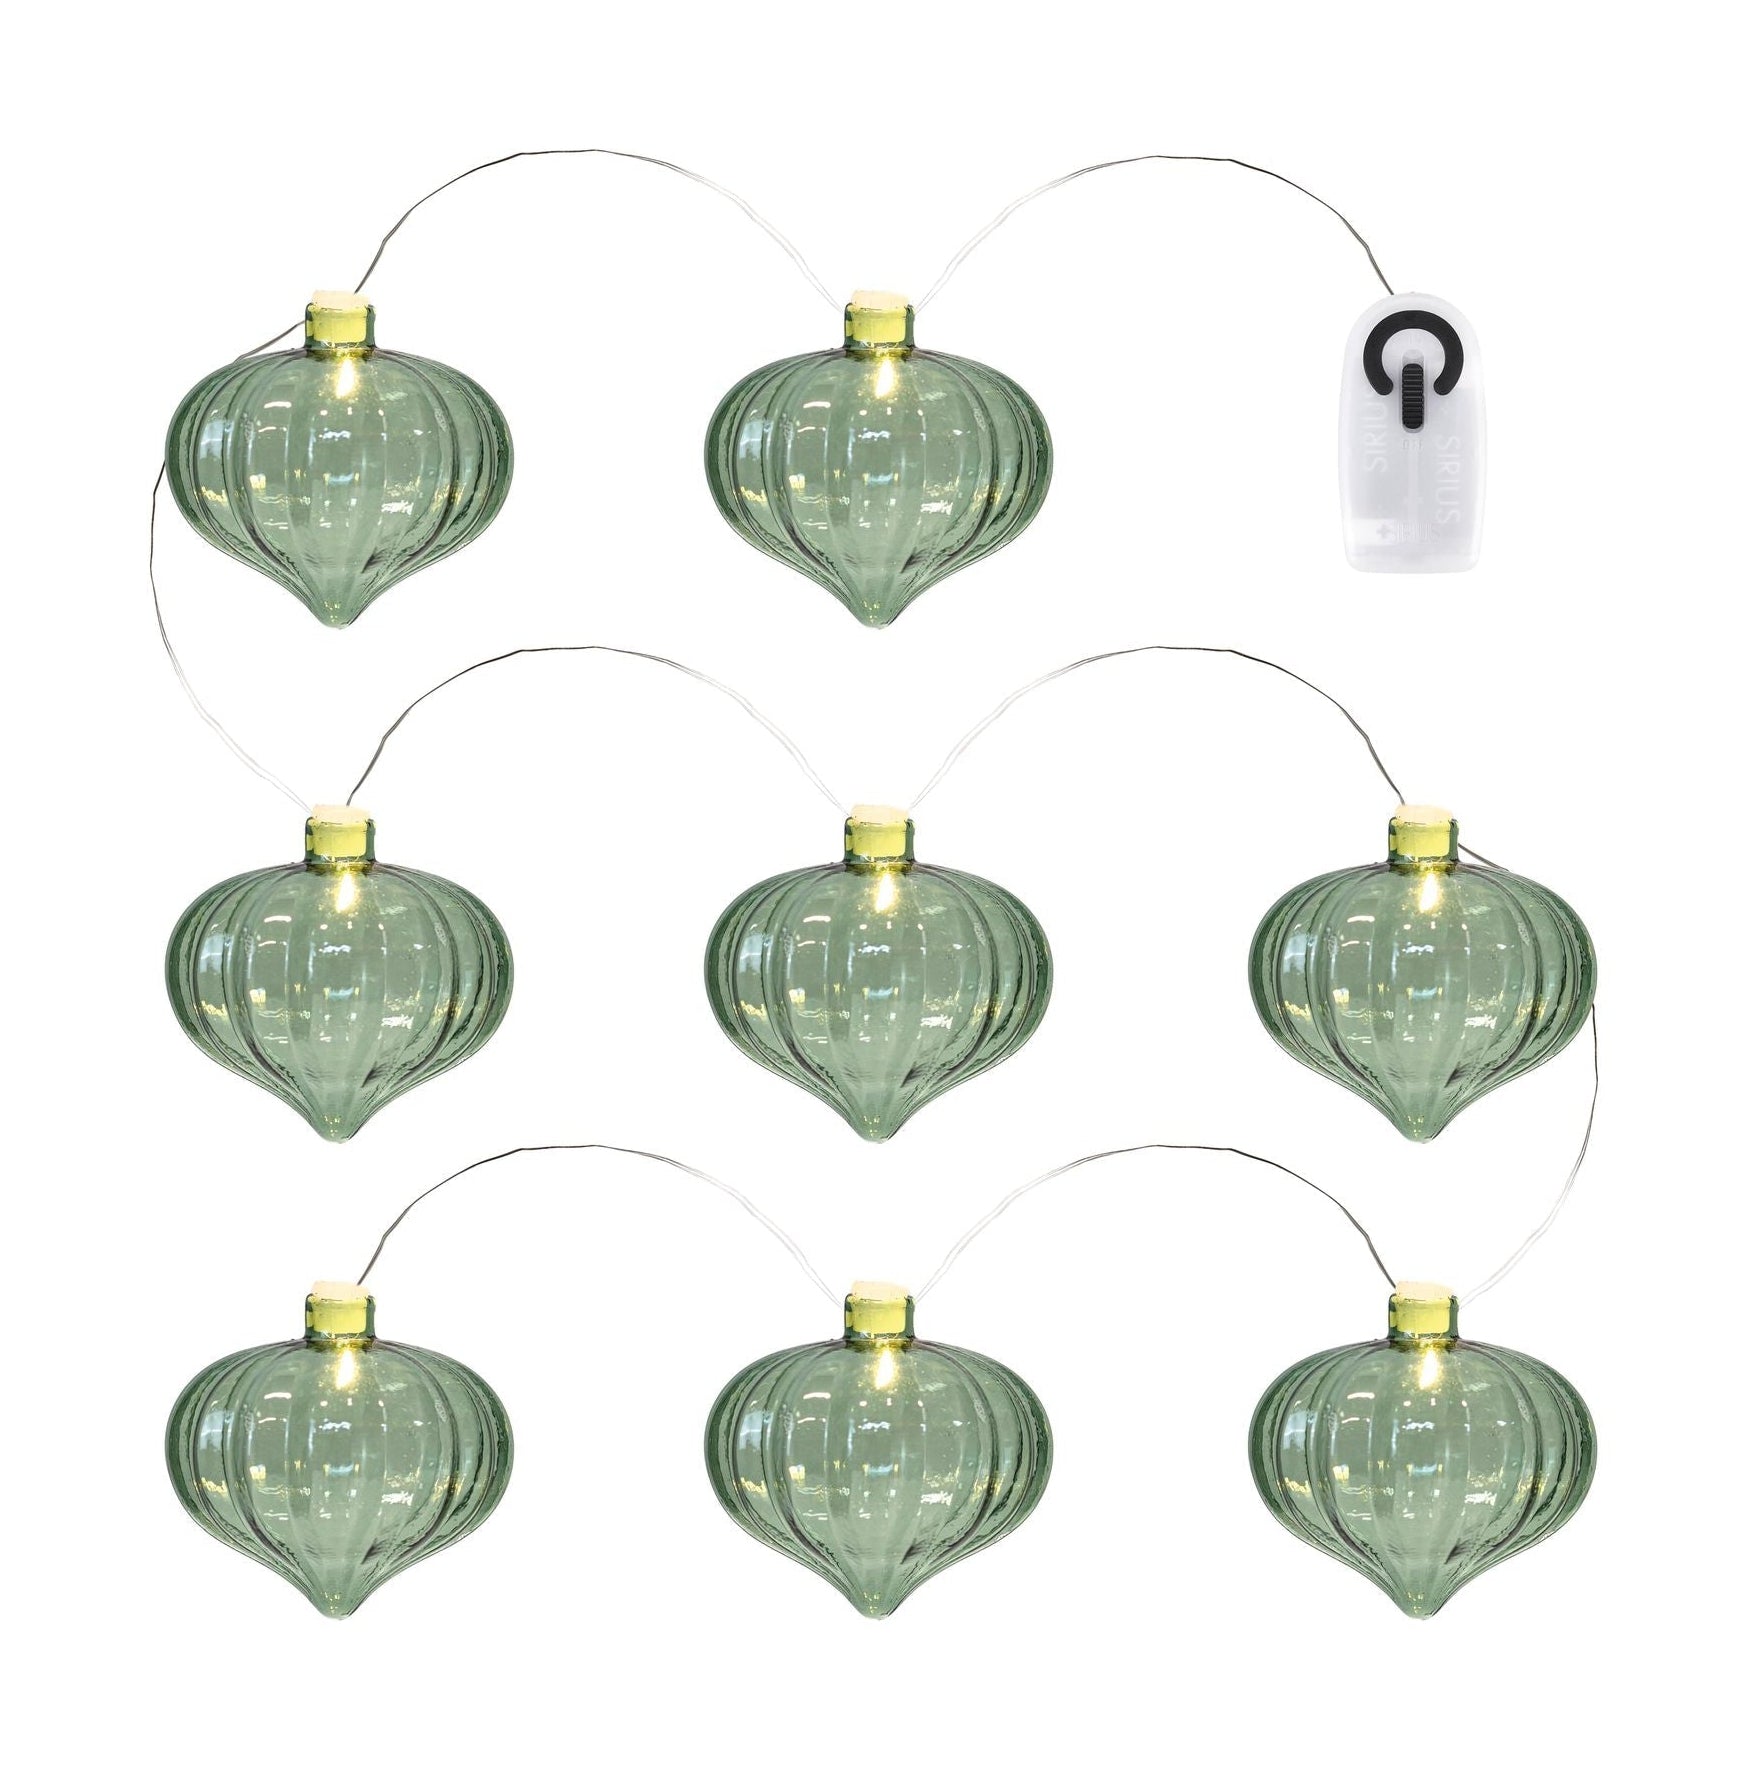 Sirius Millie Garland 8 Le Ds, Green